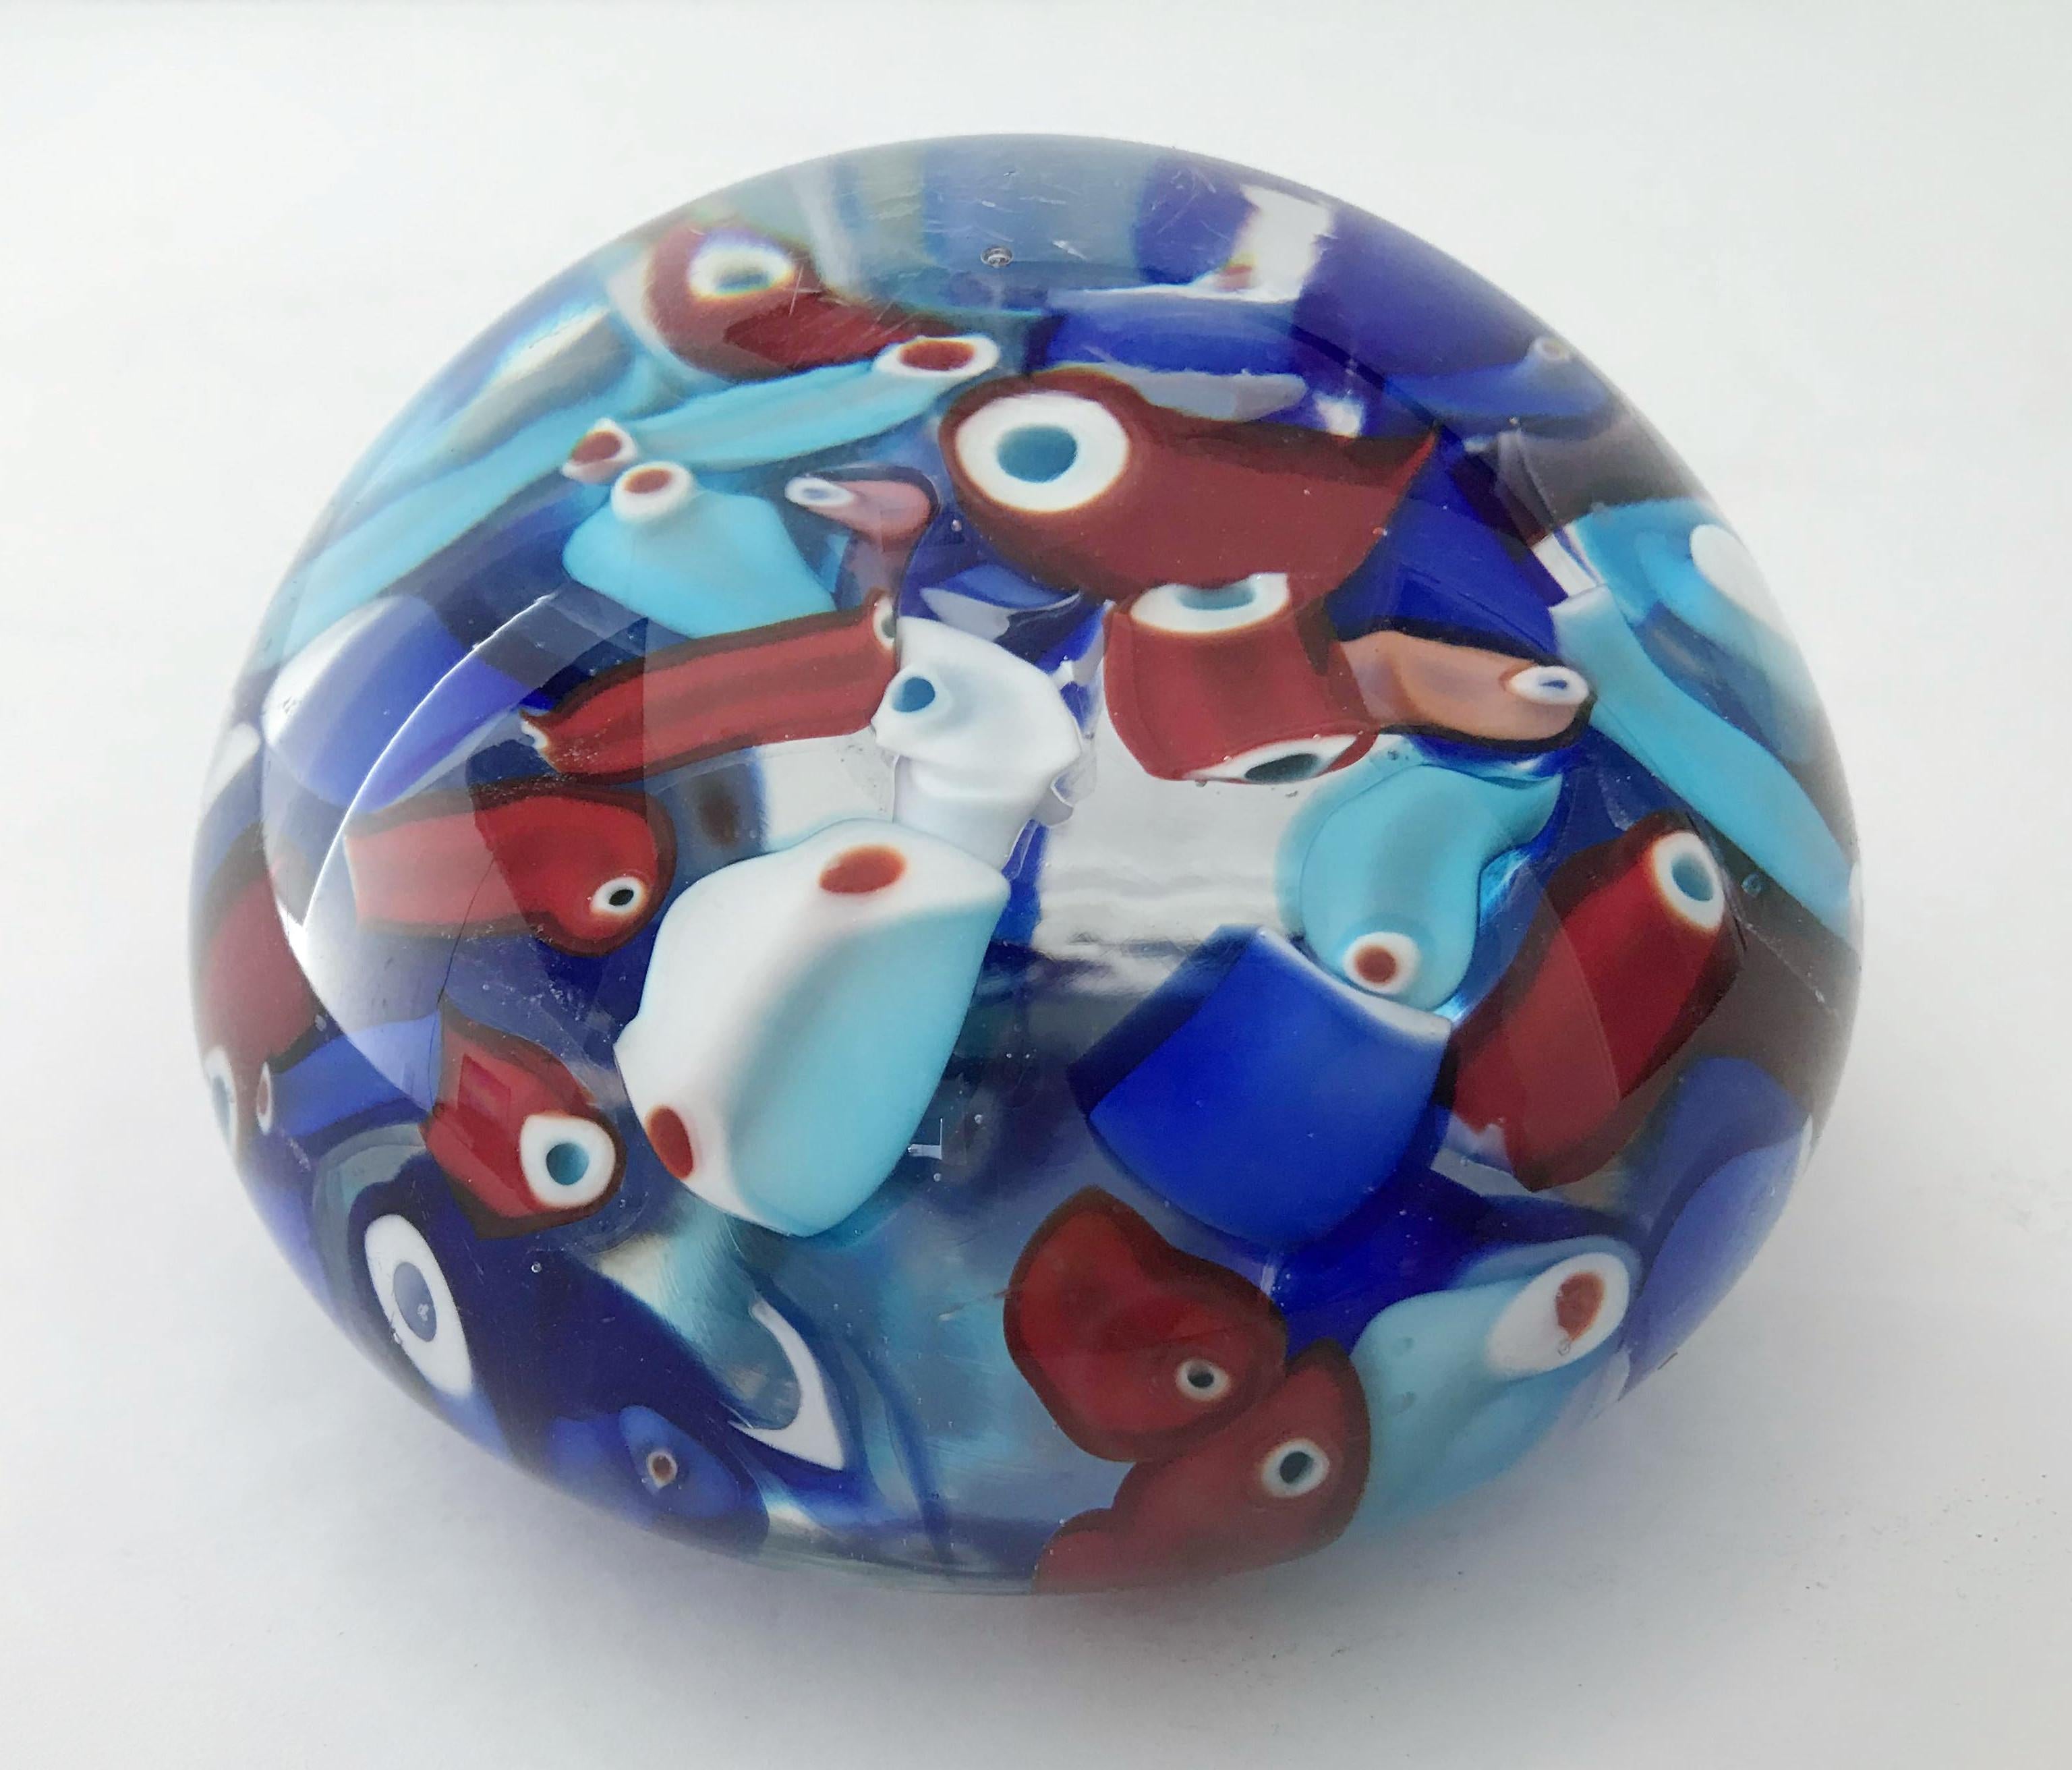 Vintage Italian Murano glass paperweight hand blown with red, white, and blue scrambled canes within the glass, made in Italy, circa 1960s
Measures: Diameter 3.5 inches, height 2.5 inches
1 in stock in Los Angeles
Order reference #: FABIOLTD